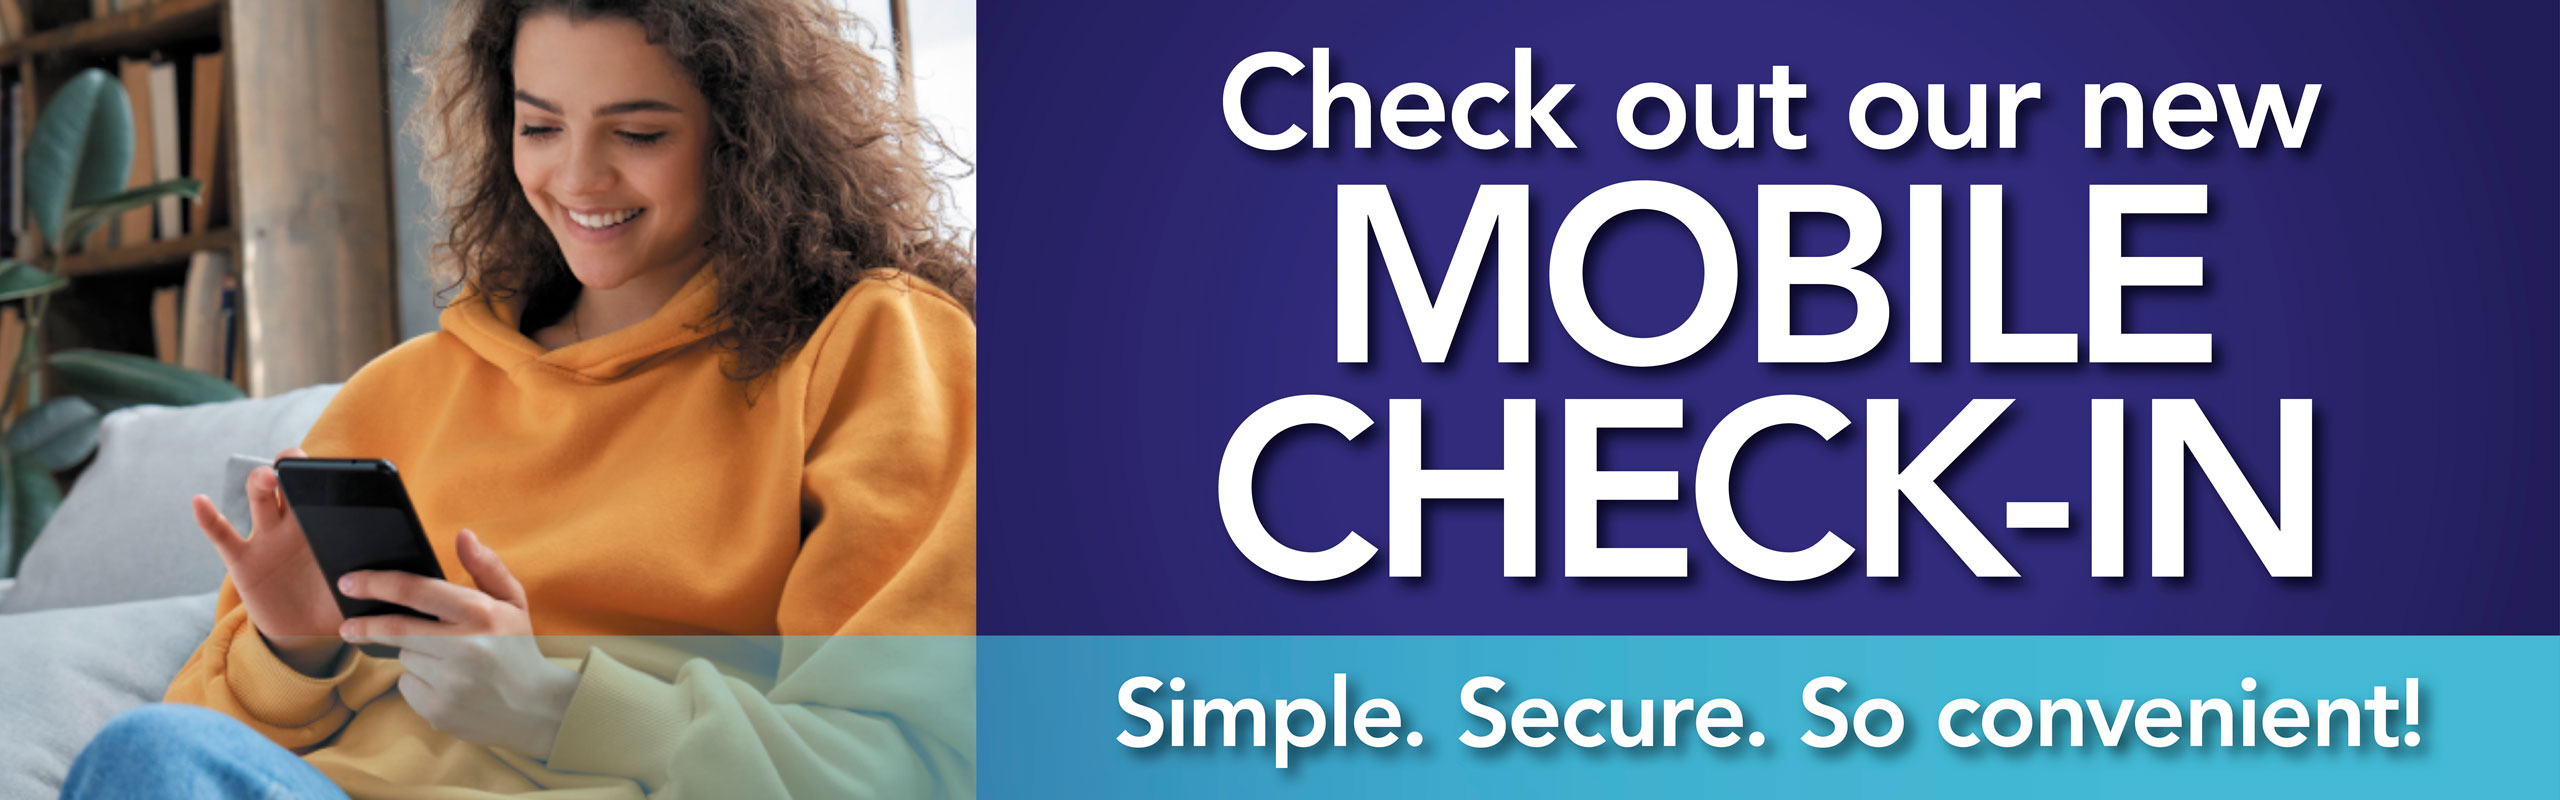 Check out our new Mobile CHECK-IN that is Simple, Secure, and so Convenient!